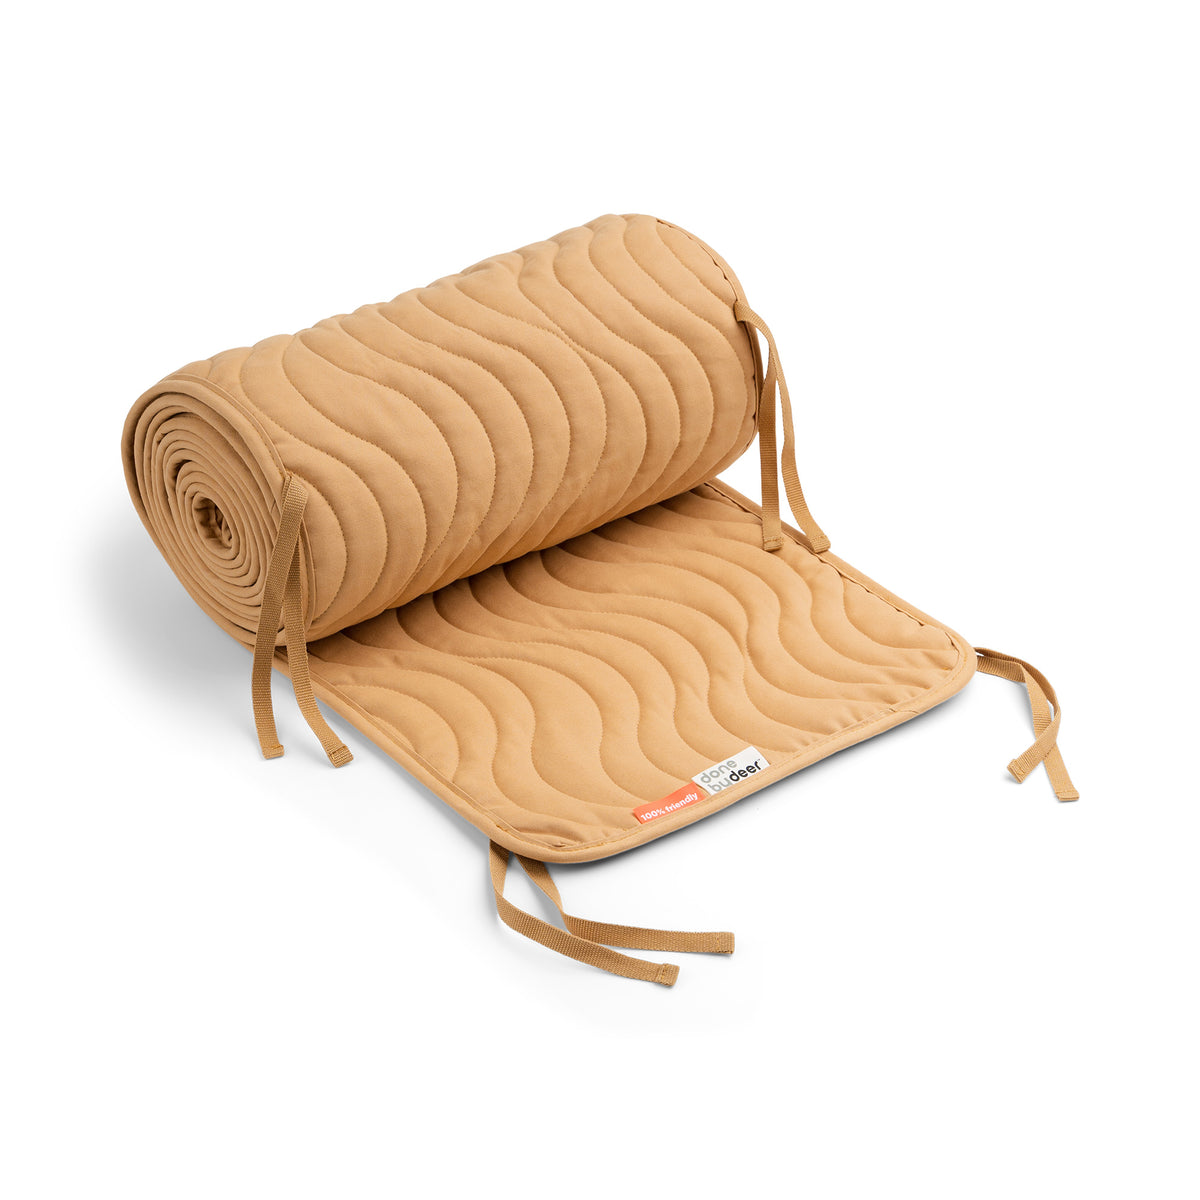 Quilted bed bumper with strings - Waves - Mustard - Front